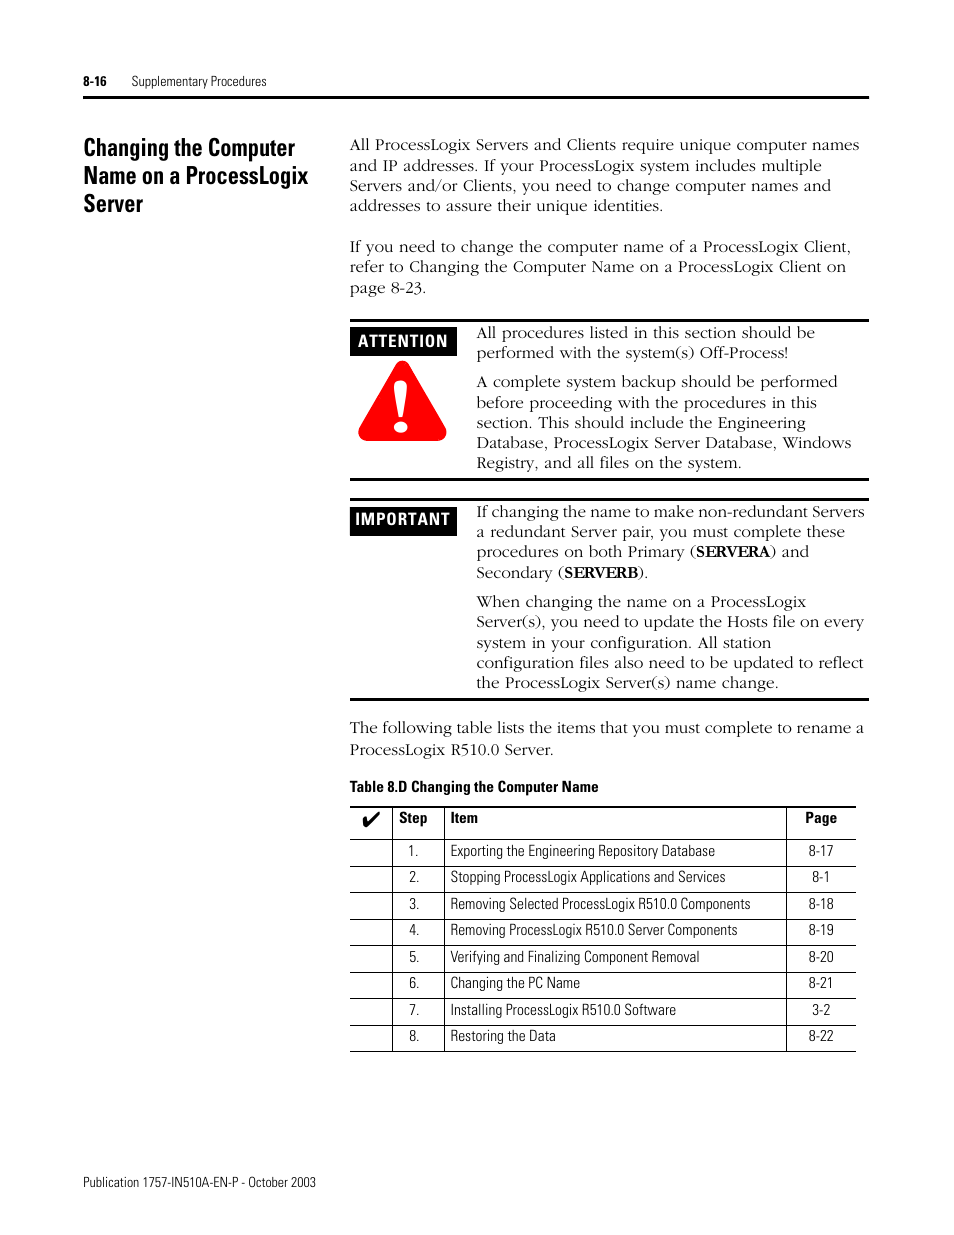 Rockwell Automation 1757-SWKIT5100 ProcessLogix R510.0 Installation and Upgrade Guide User Manual | Page 218 / 271